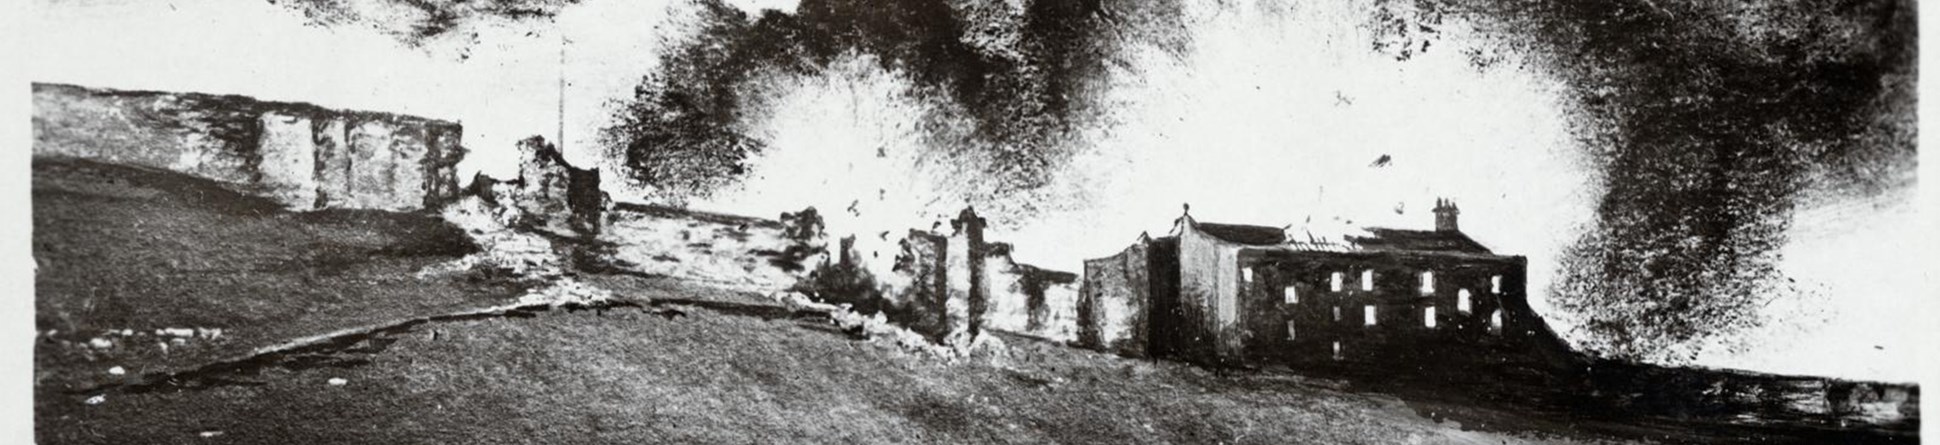 Scarborough Castle, North Yorkshire, a reconstruction of the bombardment shows shells hitting the castle curtain wall and the old barrack block. No photographs are known to survive of the bombardment as it took place but reconstructions like this designed for a postcard convey the drama of the event.